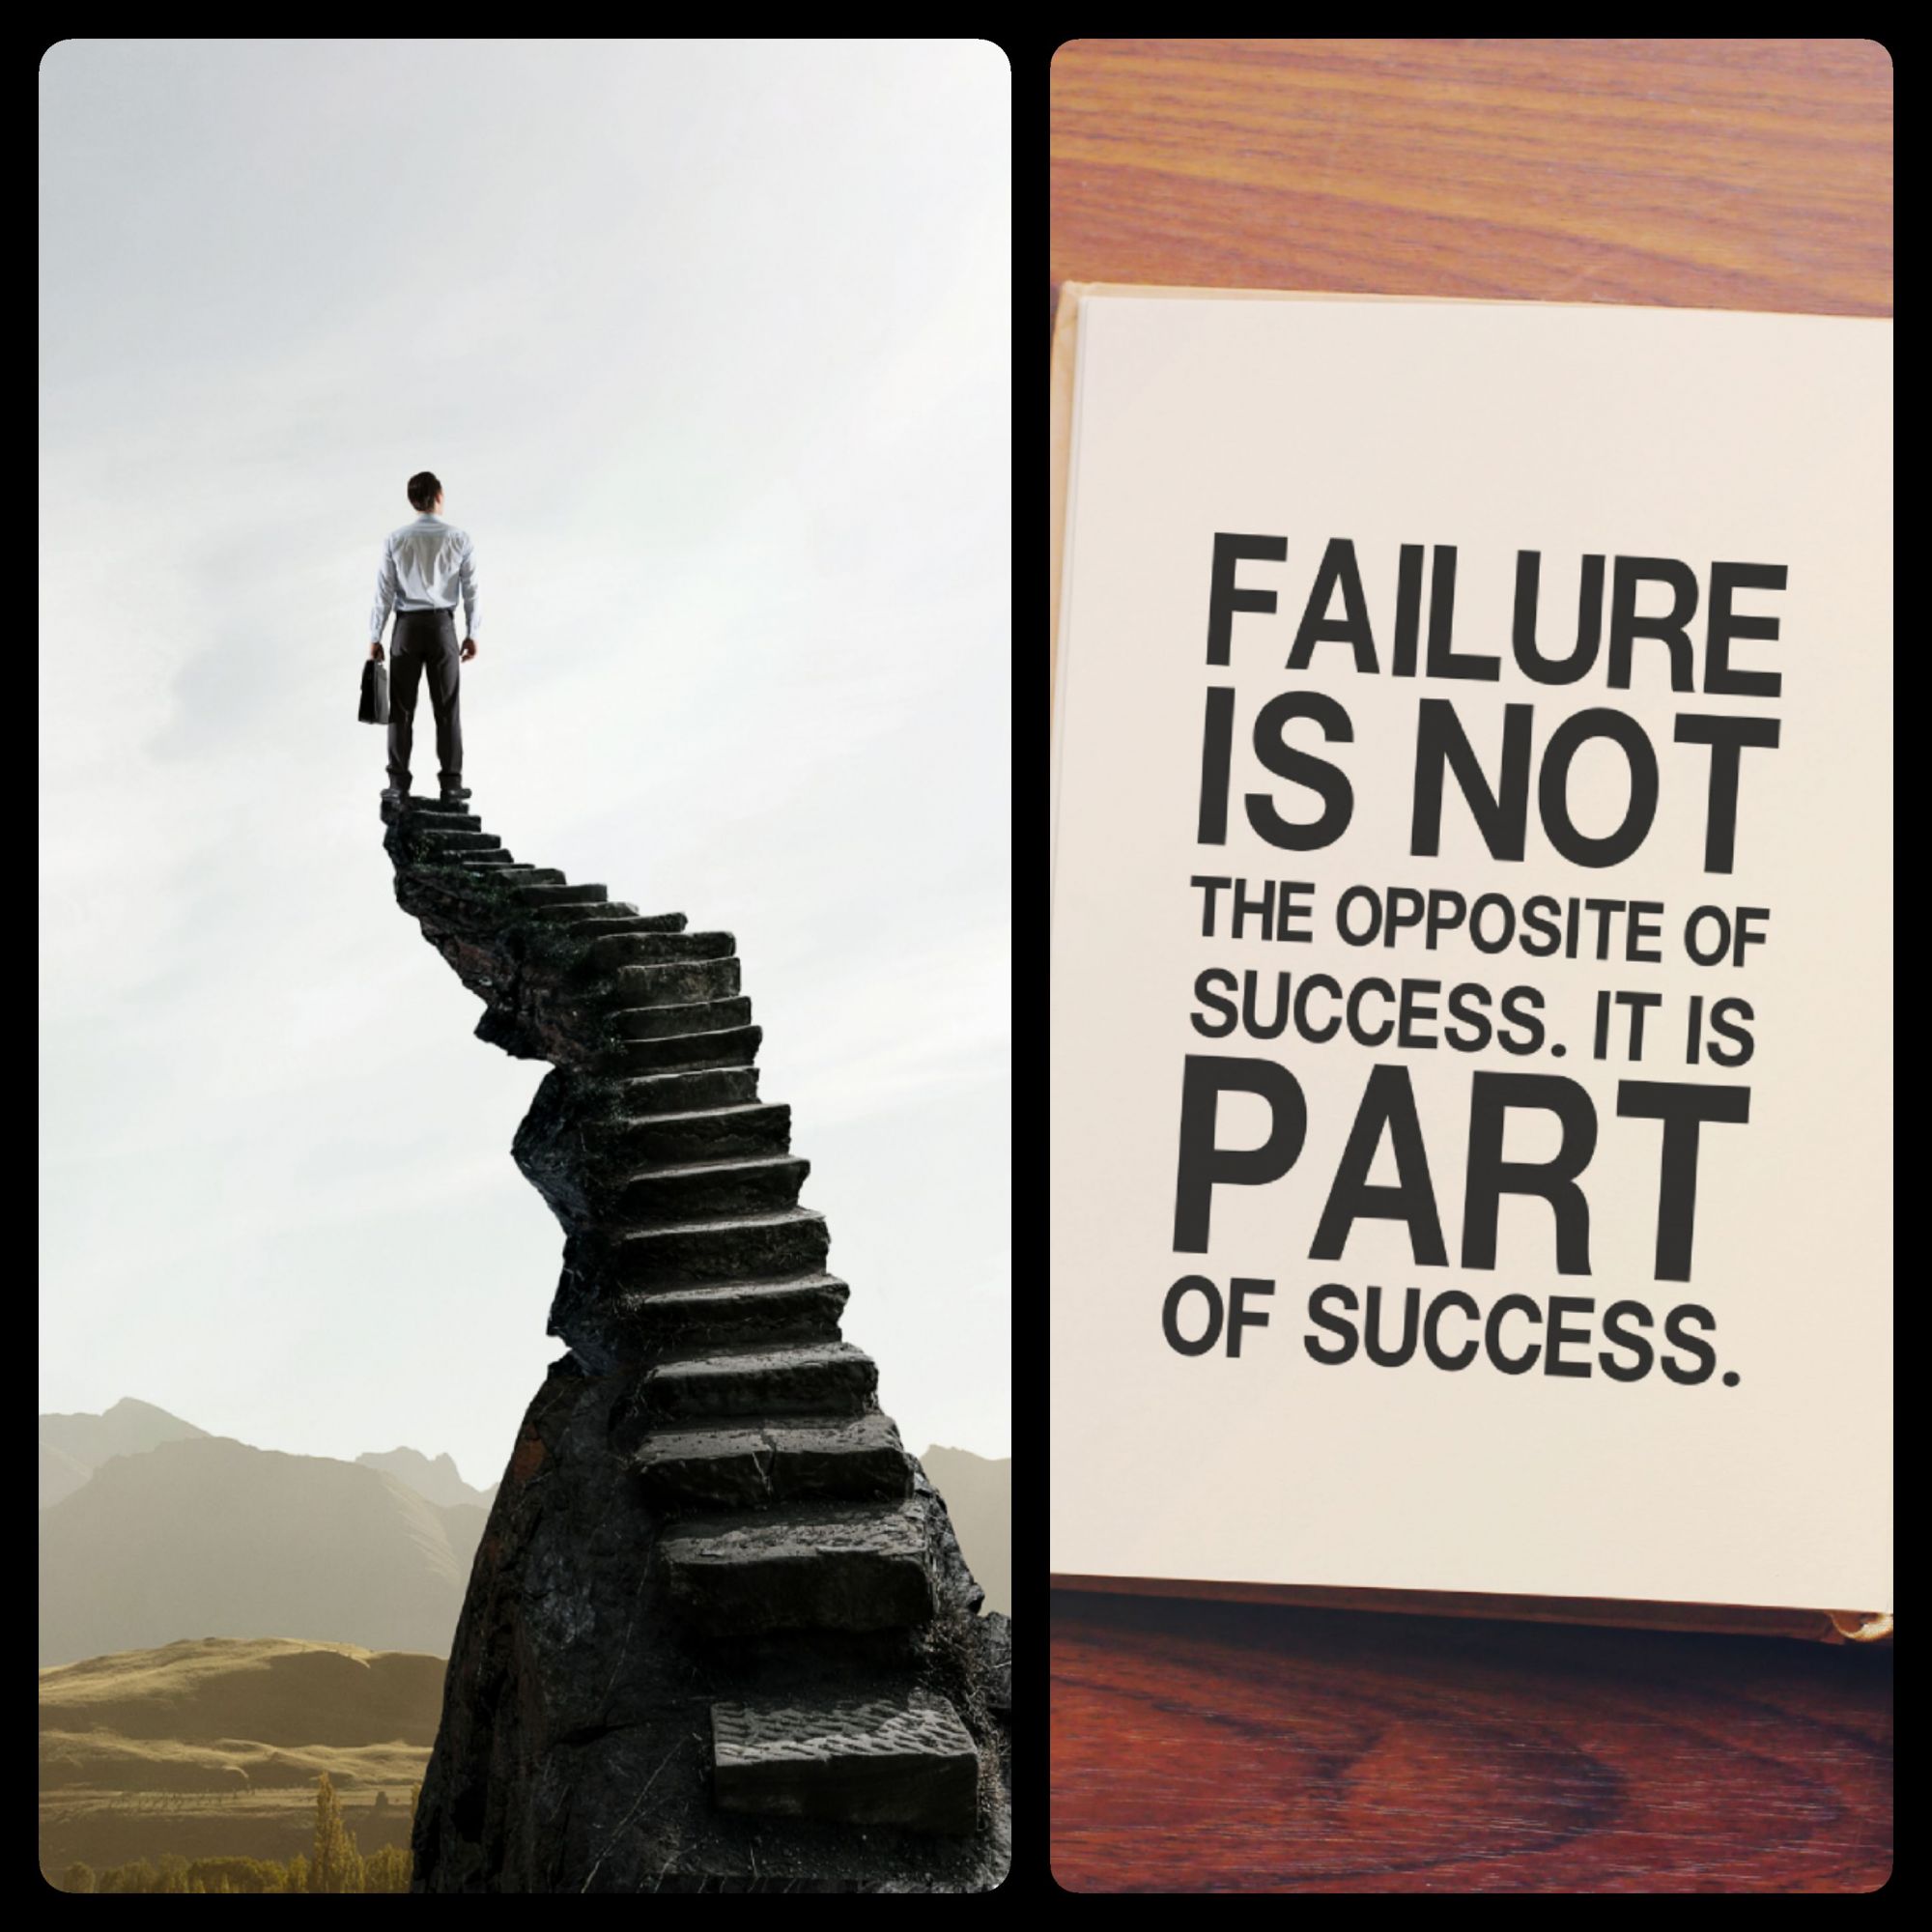 Collage of inspirational posters about failure leading to success